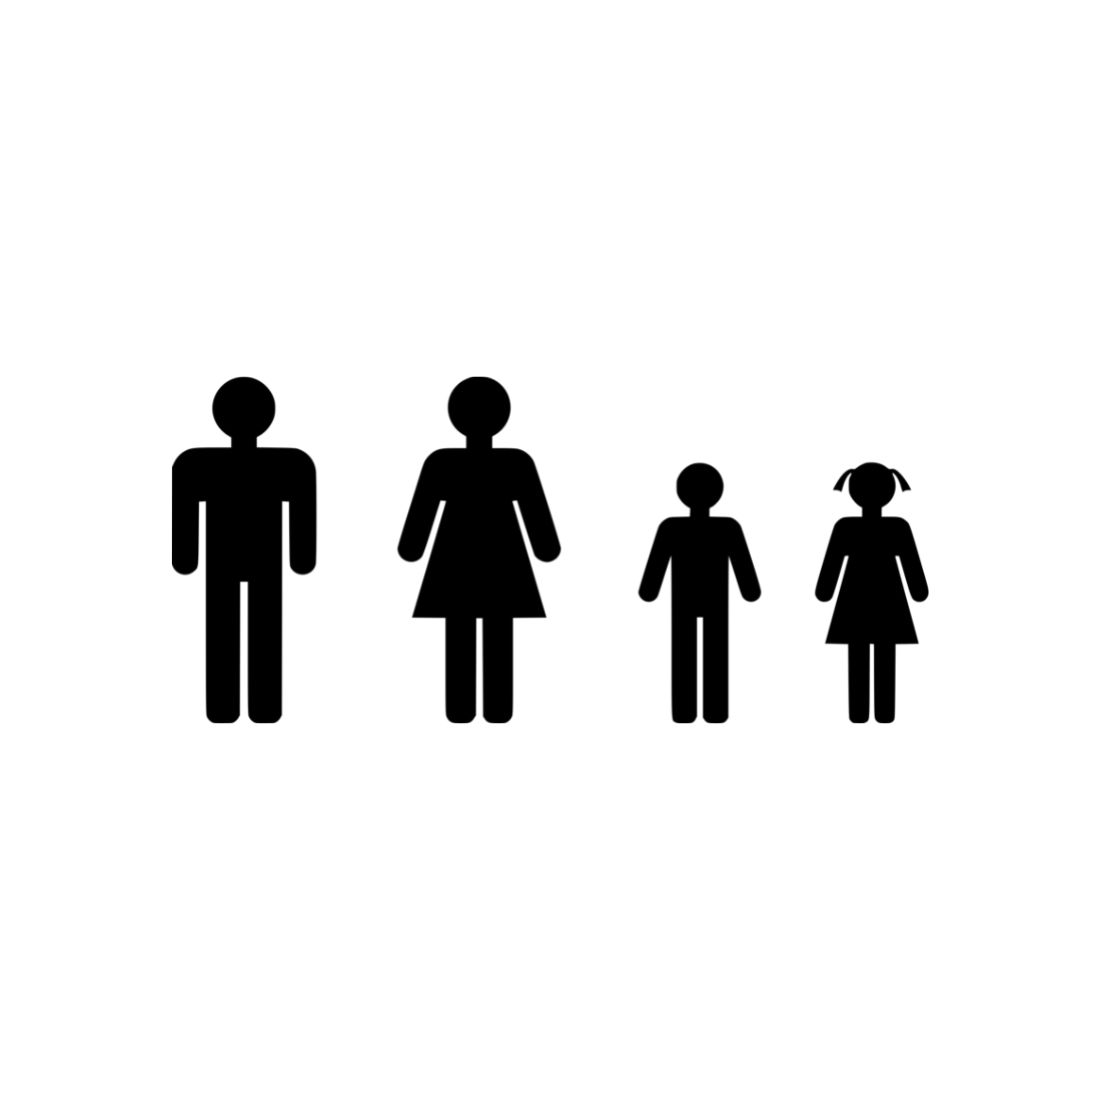 Family Silhouette Bundles, two adults and two children.